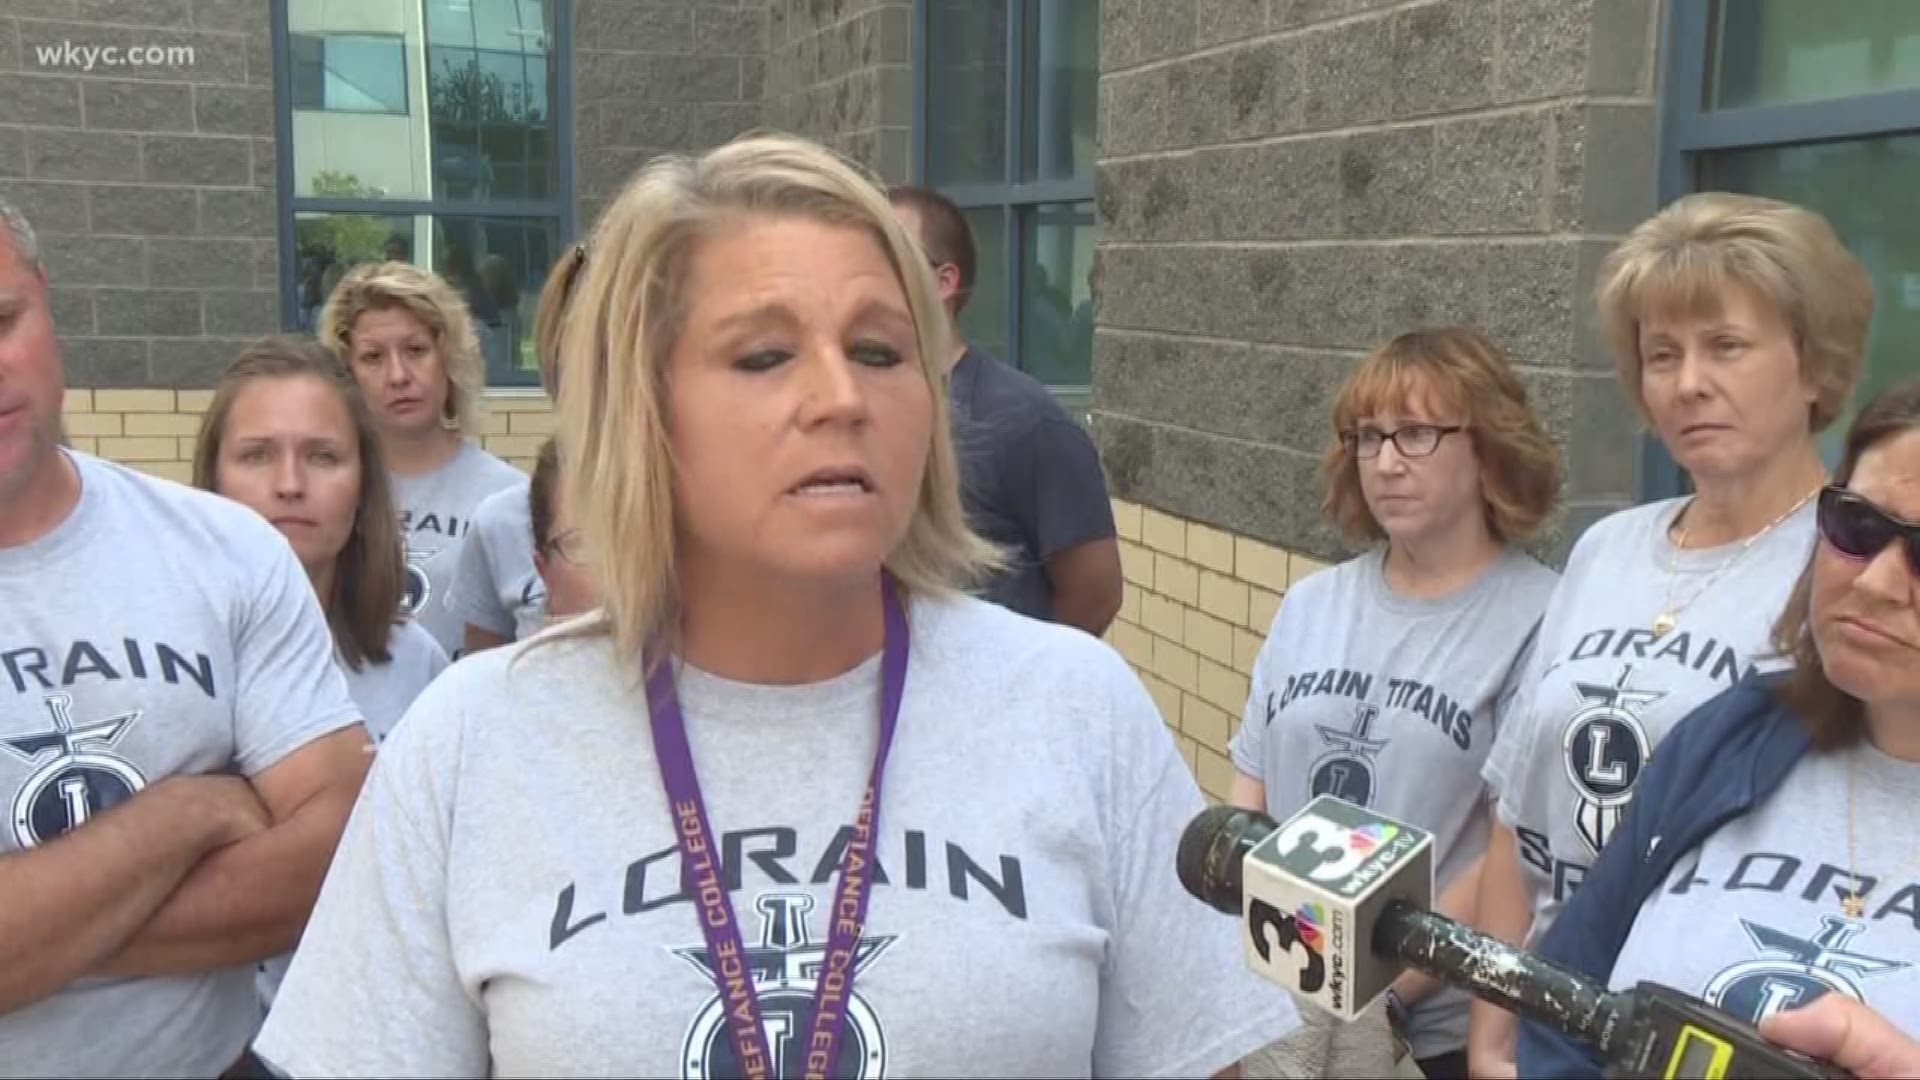 It has been messy beginning to the school year in Lorain, where teachers are concerned that they may not get paid. On Tuesday, there were two meetings to try to set things right.